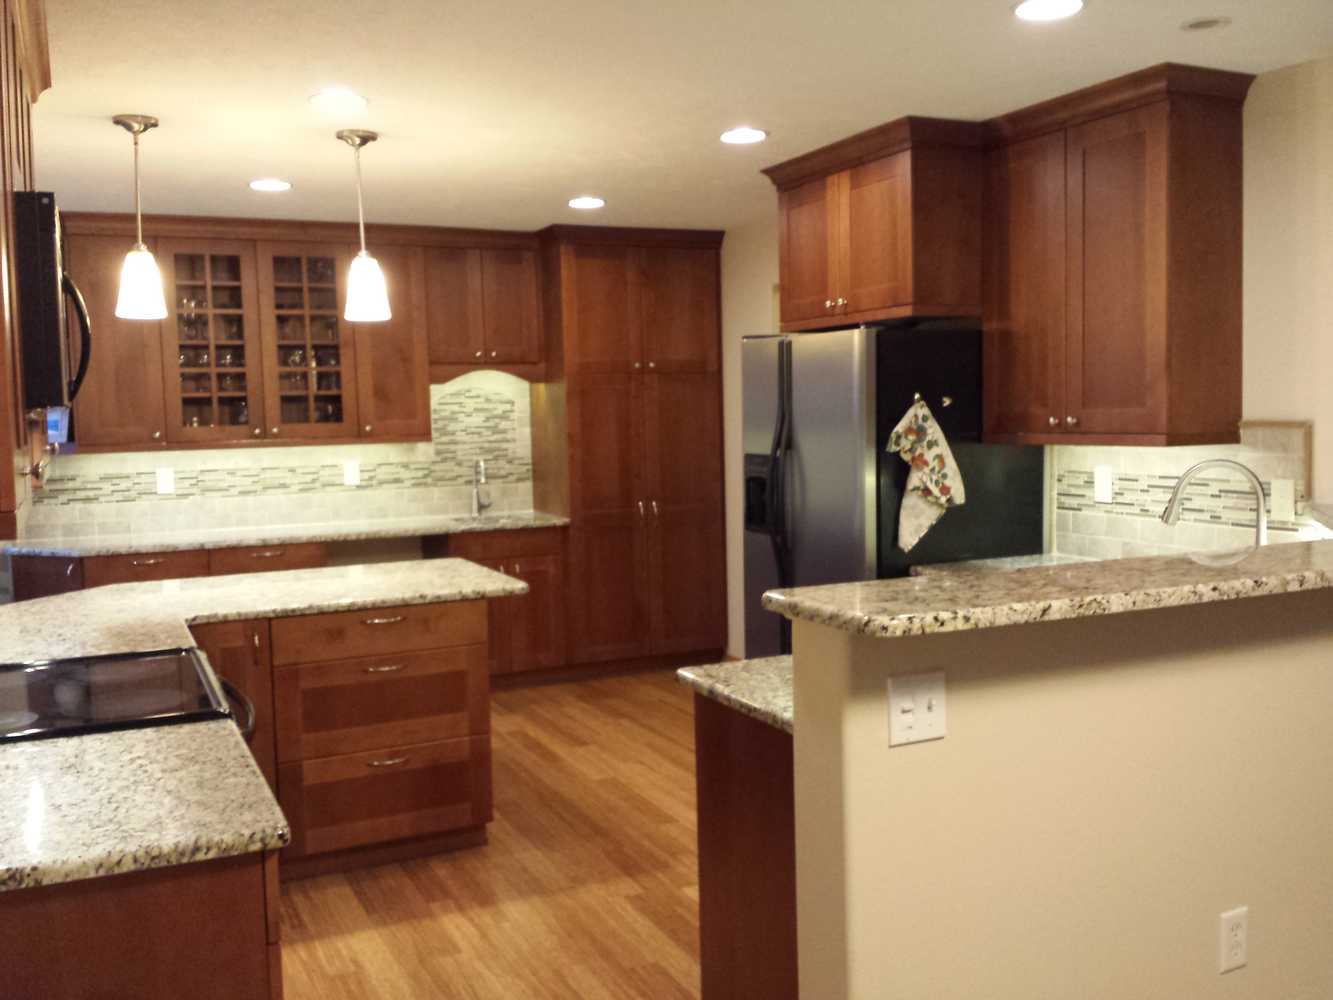 South Hill Kitchen Remodel